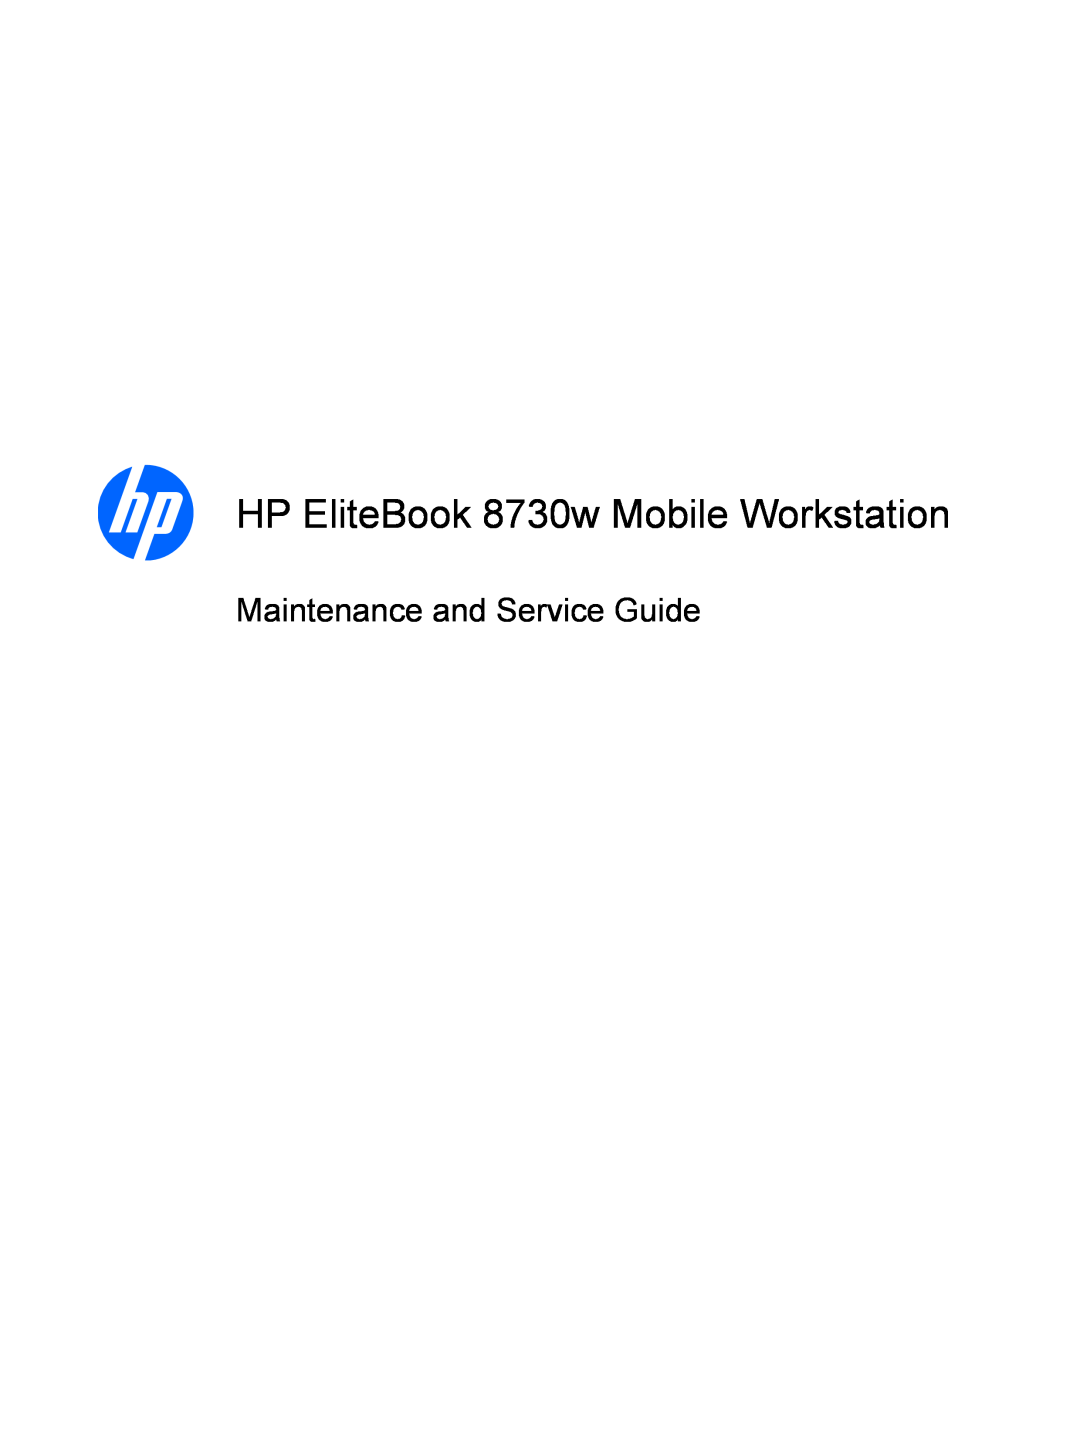 HP FN037UAABA, FN038UAABA manual HP EliteBook 8730w Mobile Workstation, Maintenance and Service Guide 